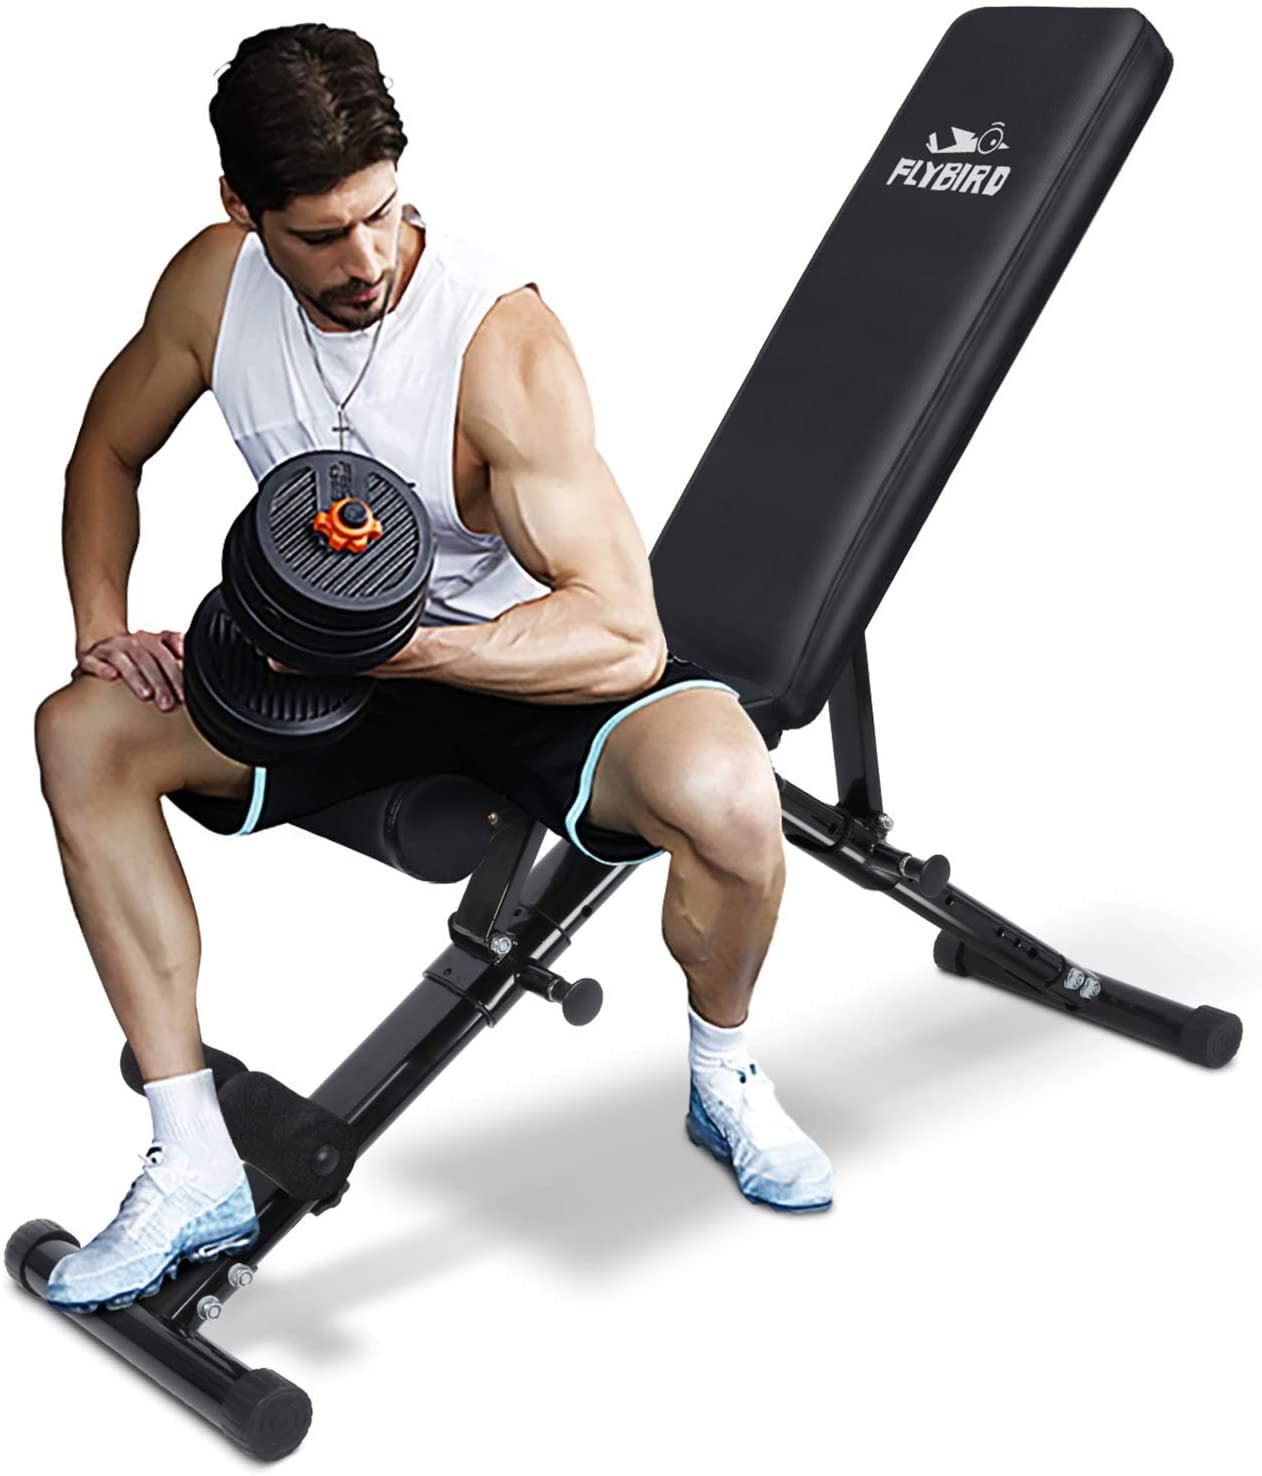 Adjustable Weight Bench Full Body Exercise Foldable Strength Training Bench Gym 